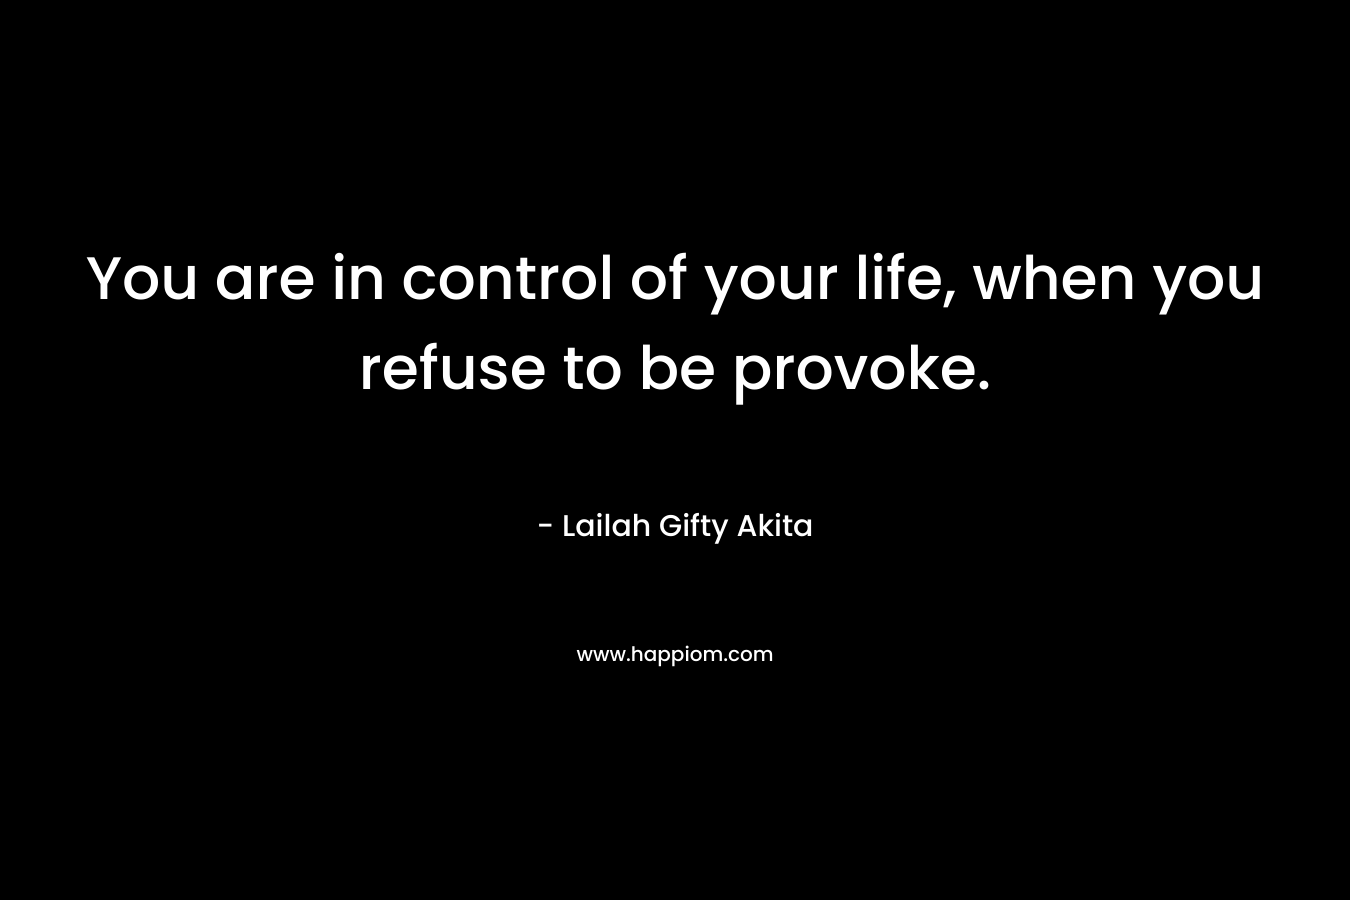 You are in control of your life, when you refuse to be provoke. – Lailah Gifty Akita